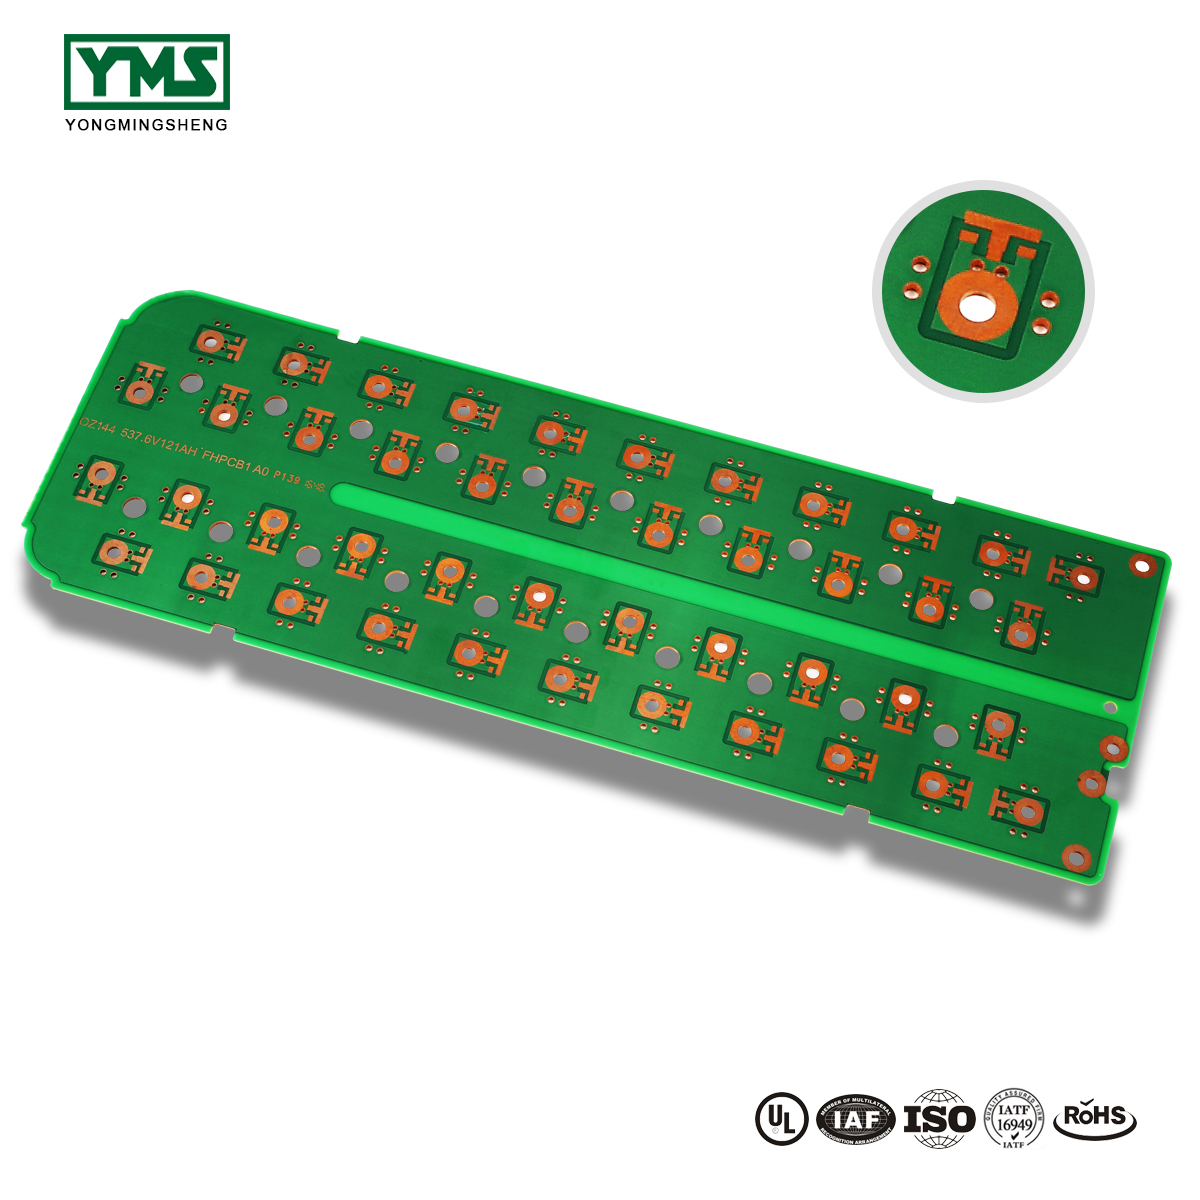 Low price for 3030c Ceramic Board - 4Layer Copper base Board | YMS PCB – Yongmingsheng